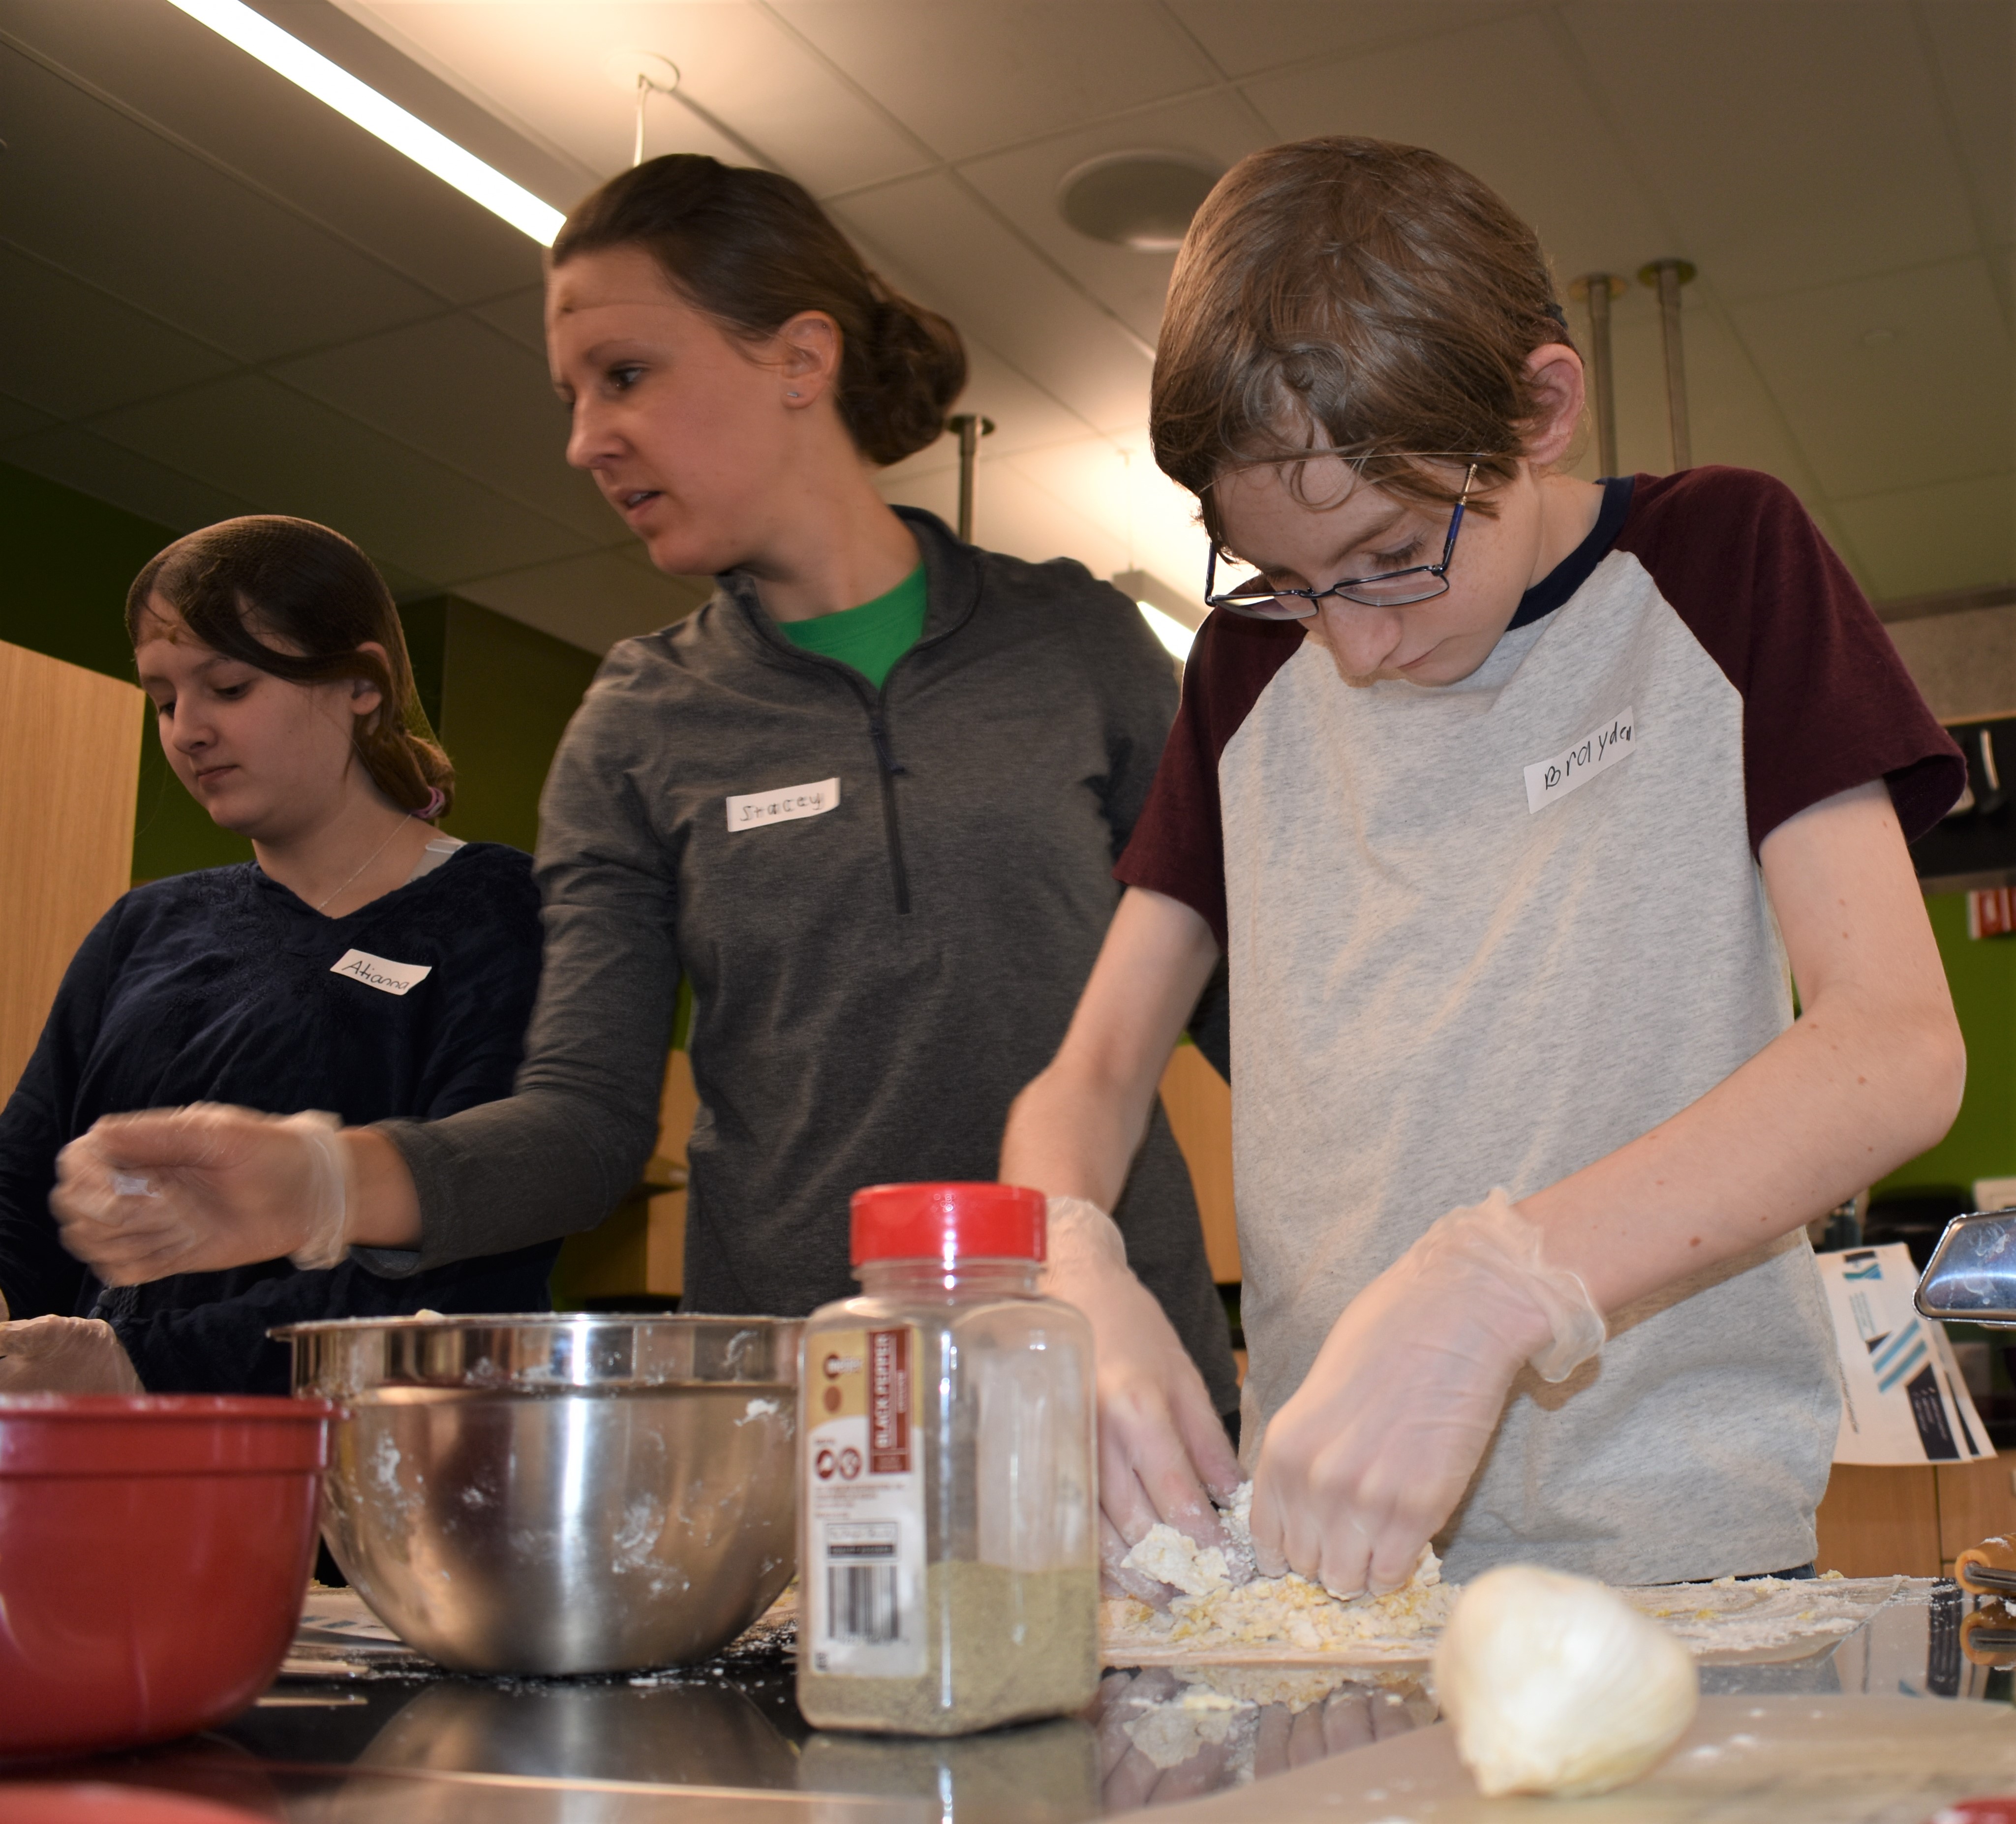 Image: Young boy cooking with ingredients in the foreground. Two women are in the background